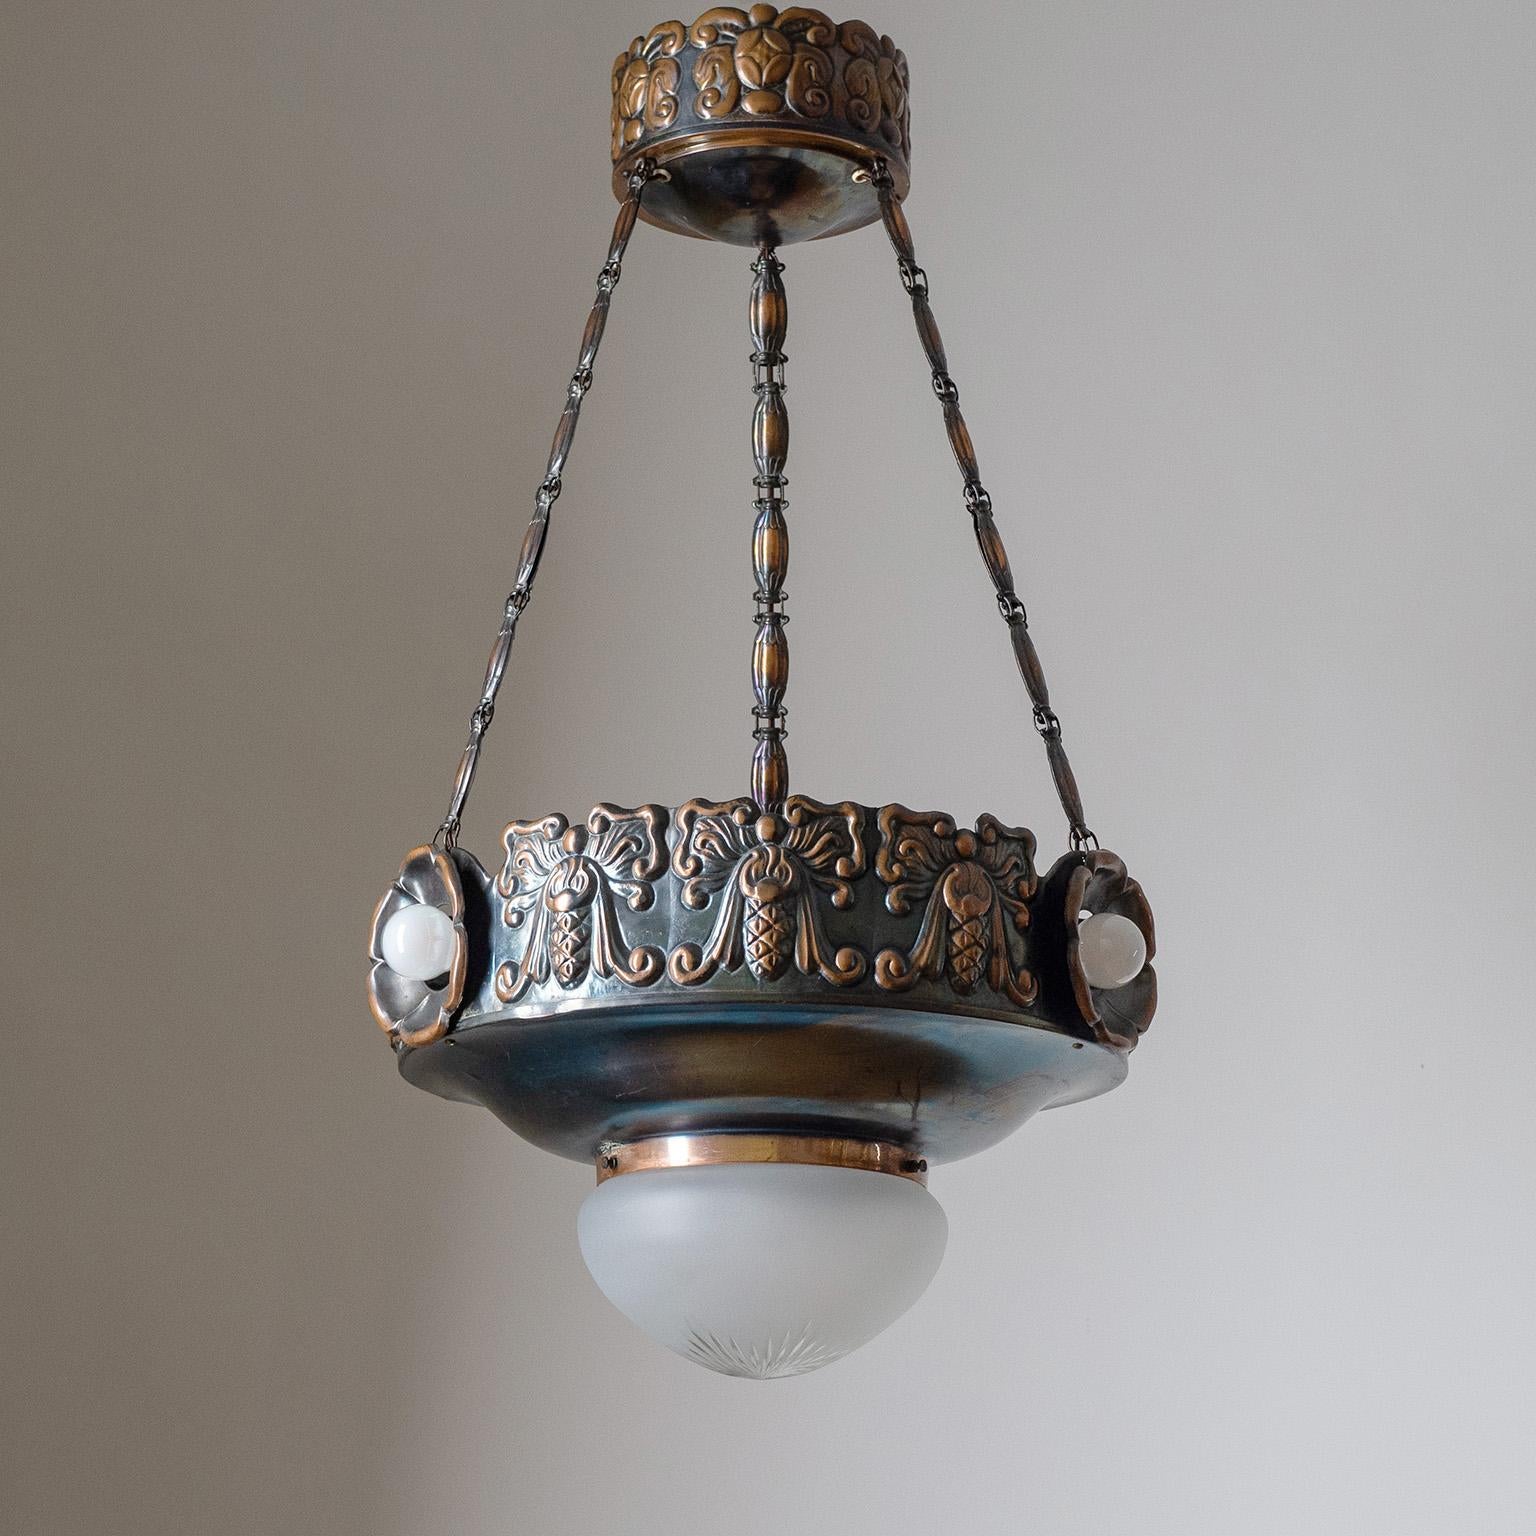 Fine Swedish Jugendstil suspension light from the 1910-1920s. The body is made entirely of copper, heavily embossed with floral and angel-like motifs. There are three lights embedded around the rim and a central one with a cut satin glass diffuser.